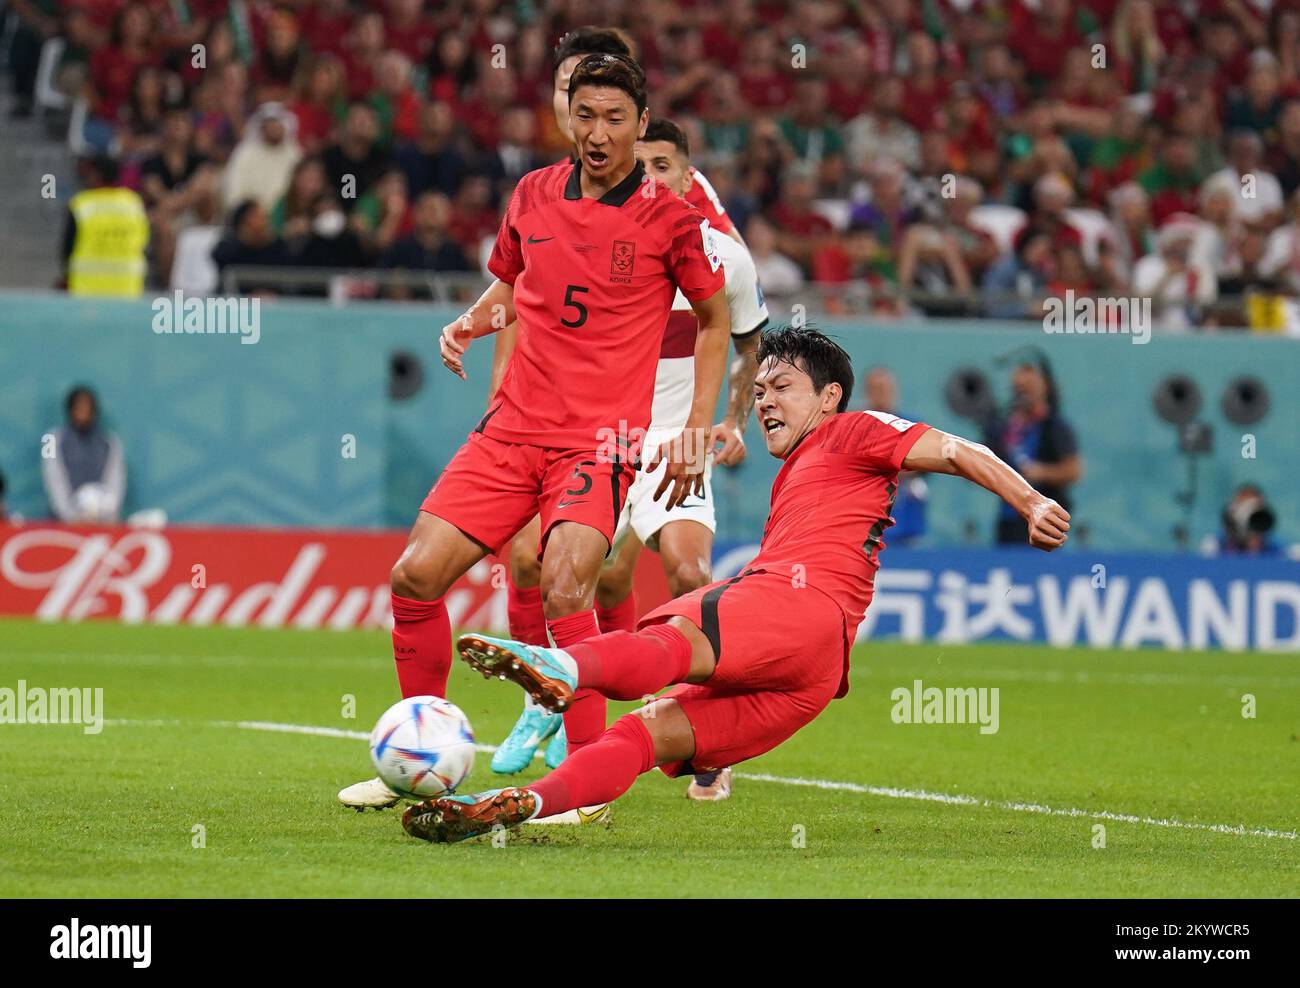 South Korea's Kim Young-Gwon scoring the equalising goal to level the score at 1-1 during the FIFA World Cup Group H match at the Education City Stadium in Al-Rayyan, Qatar. Picture date: Friday December 2, 2022. Stock Photo